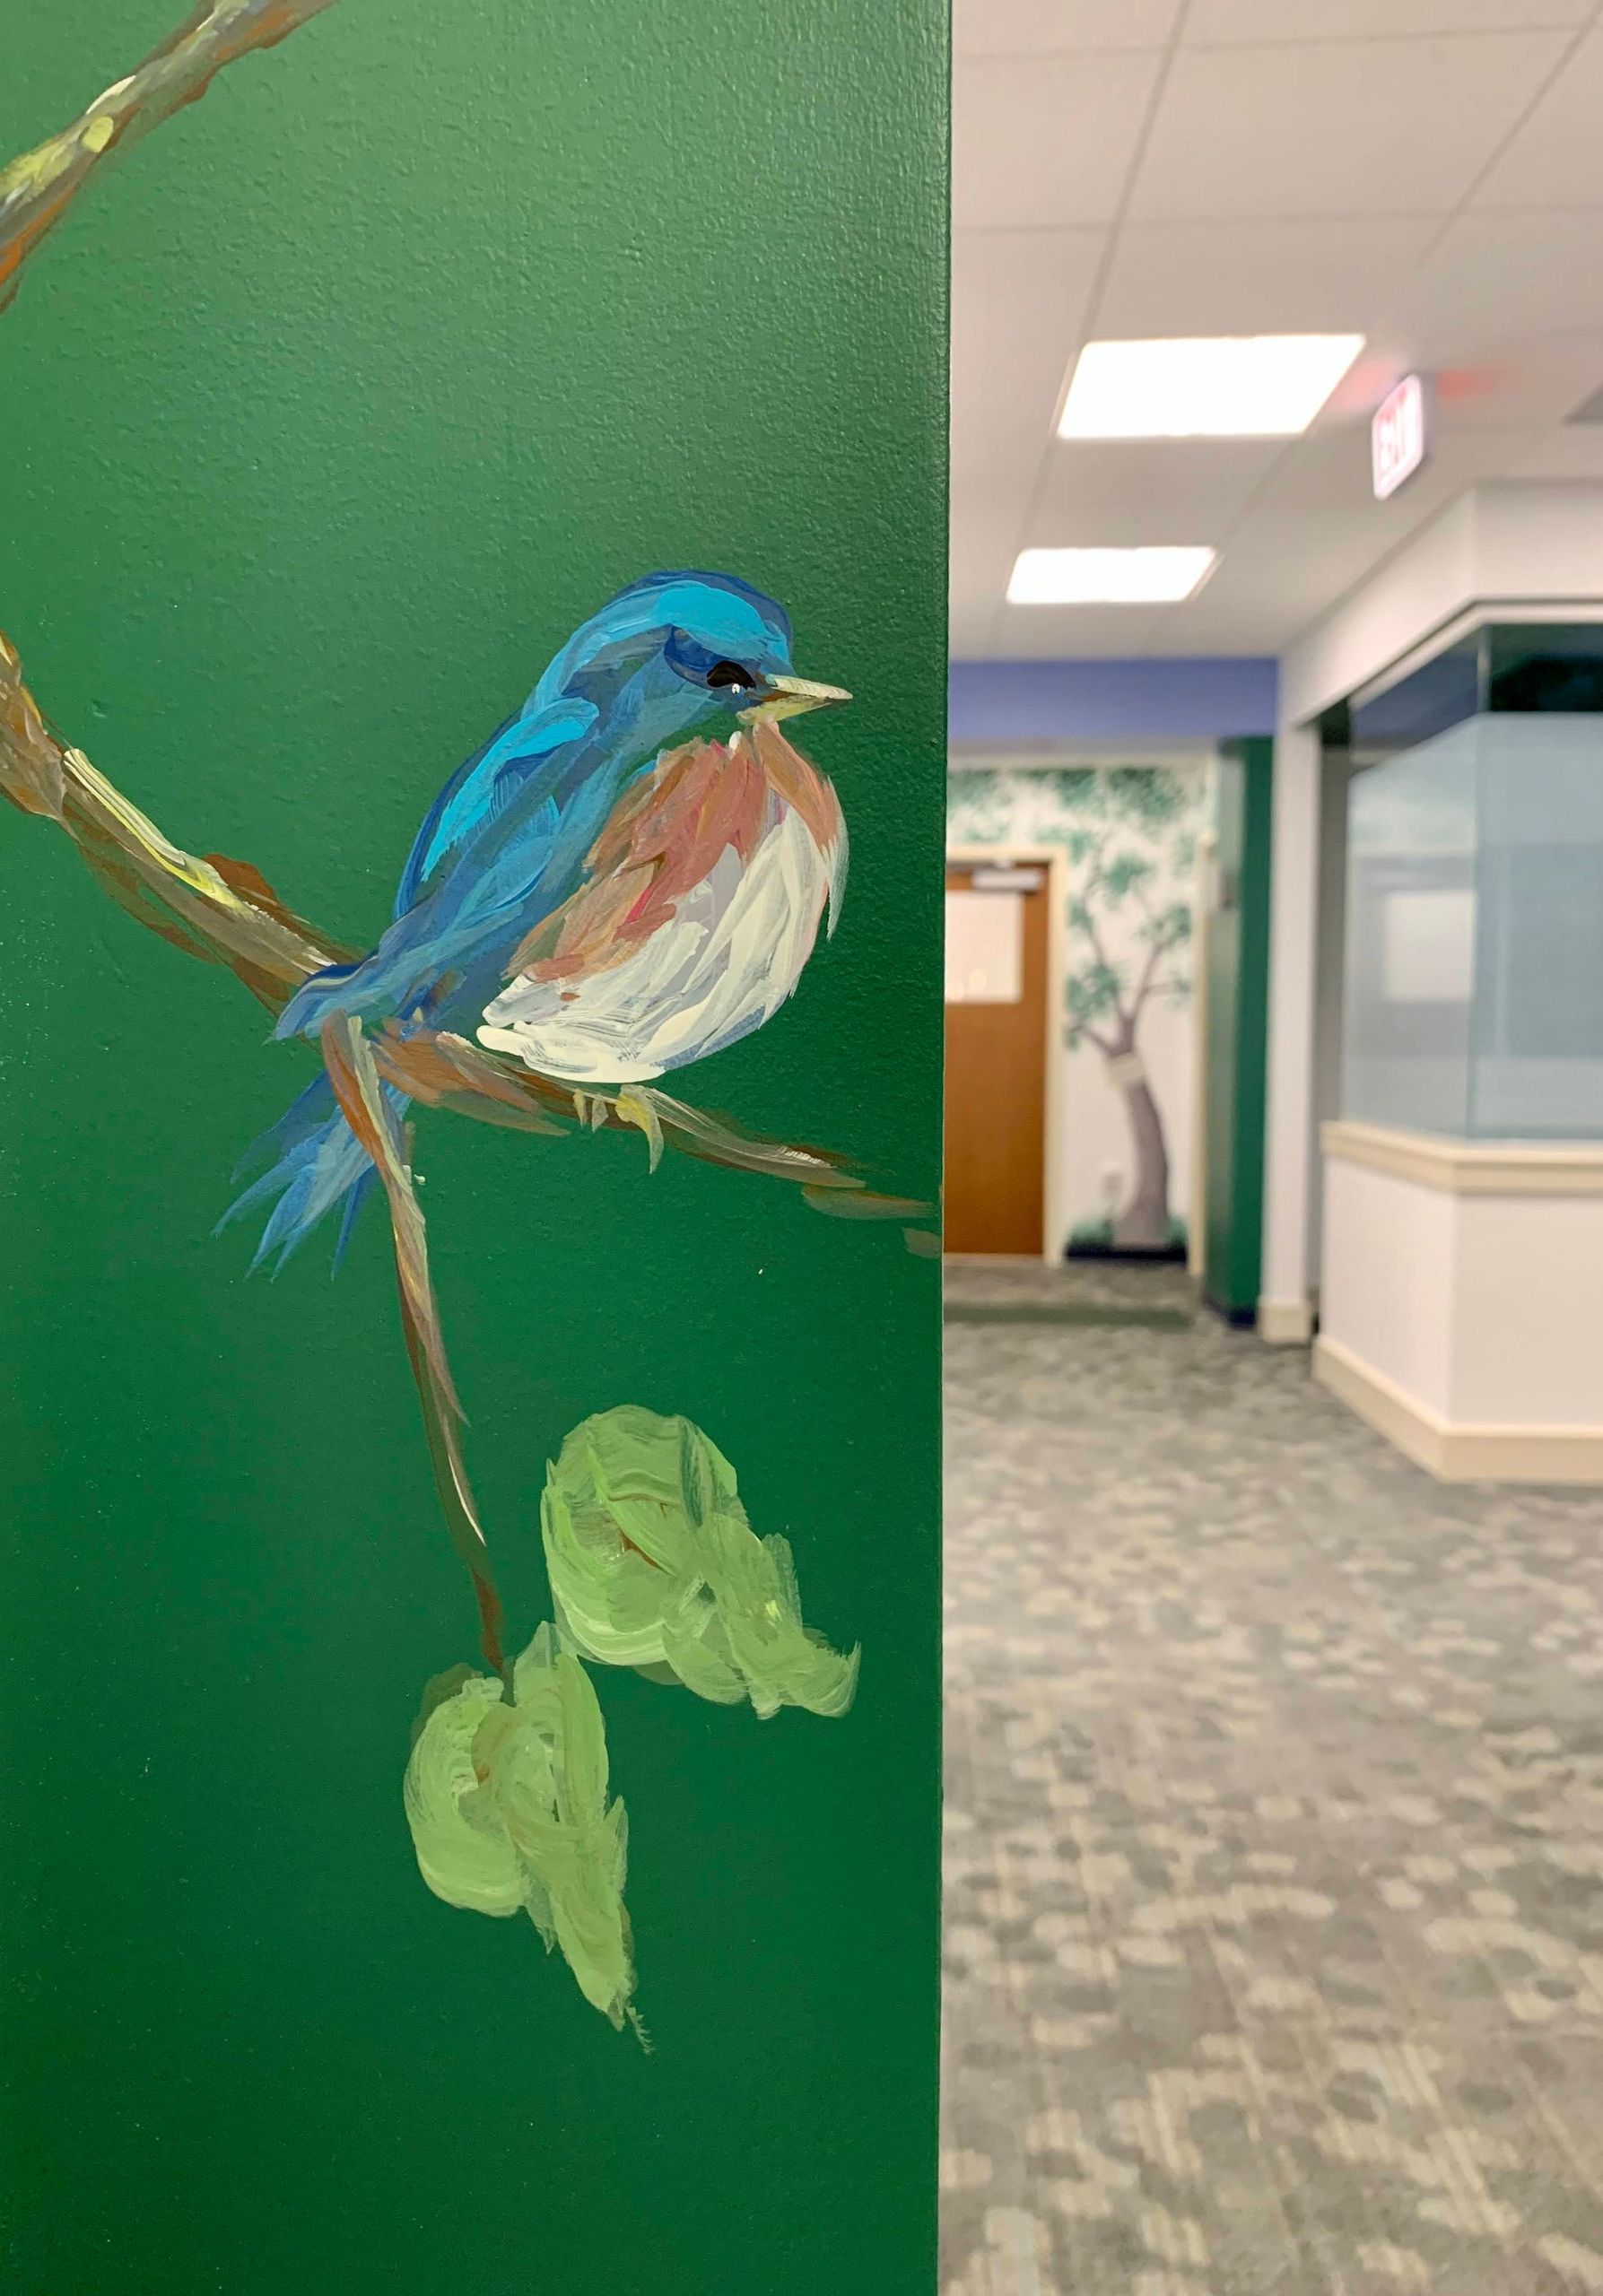 Pediatric office mural with blue bird on a branch